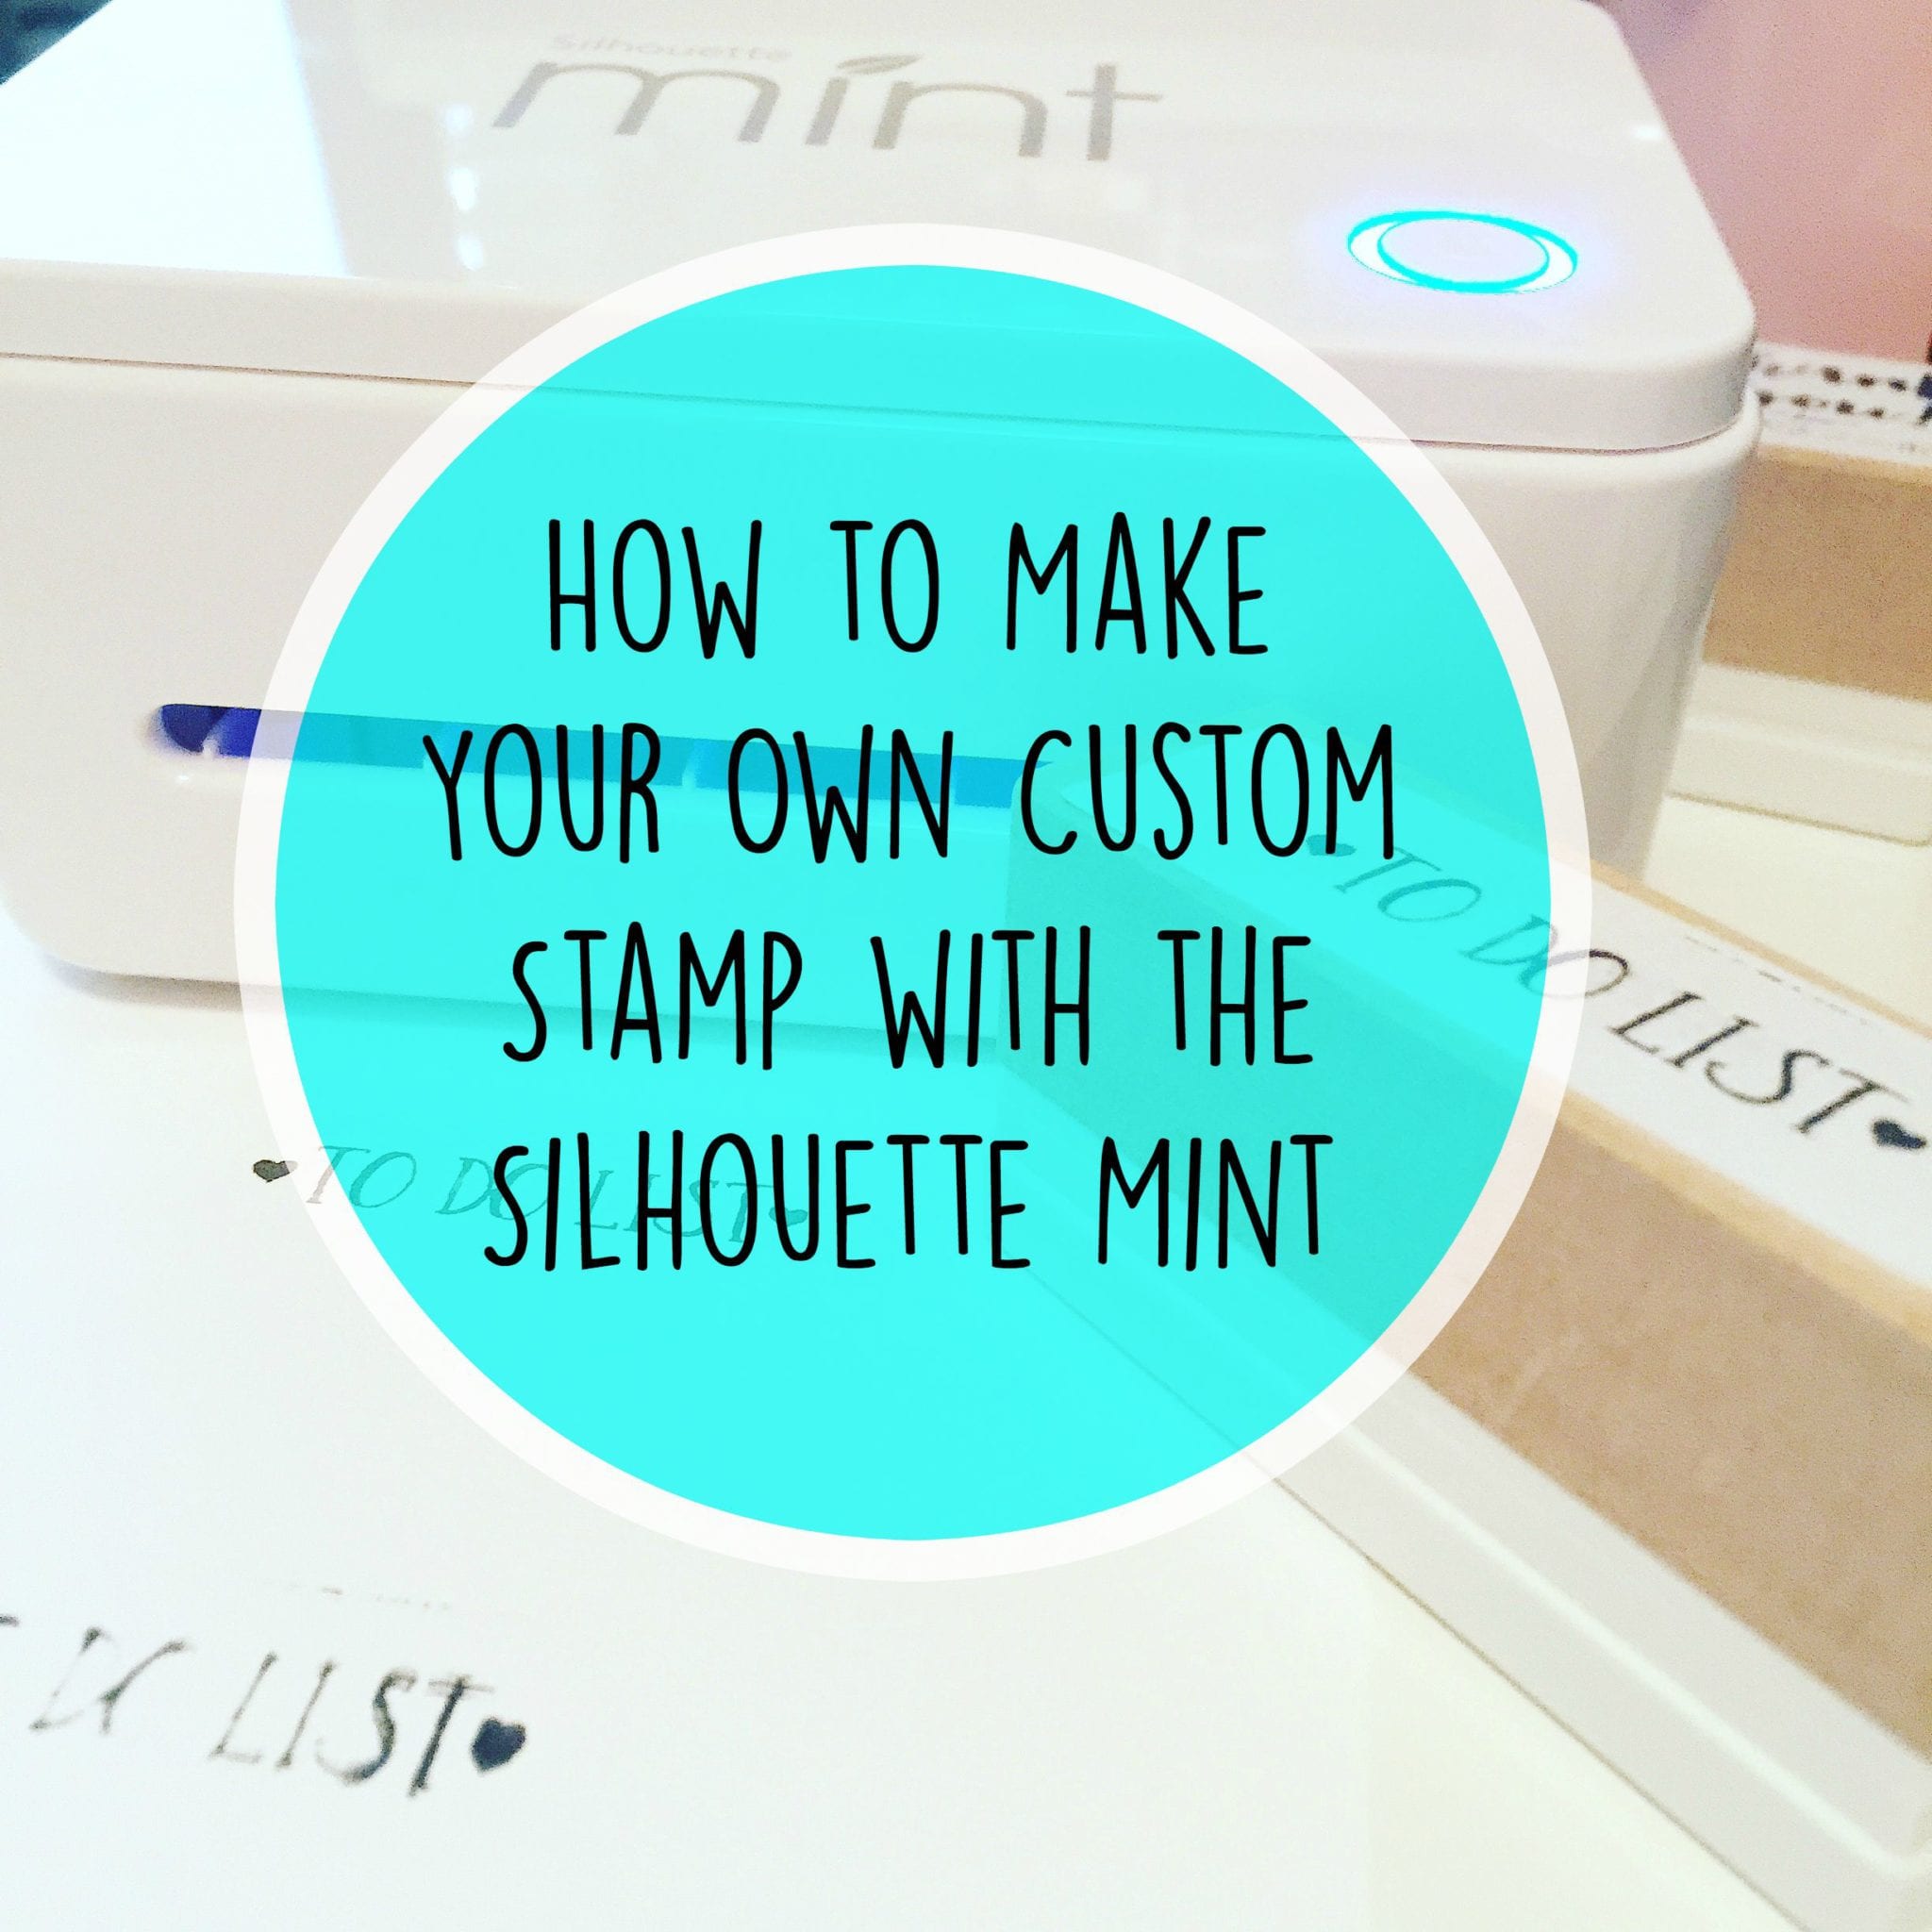 How To Use The Silhouette Mint  Silhouette mint, Stamp maker, Silhouette  diy